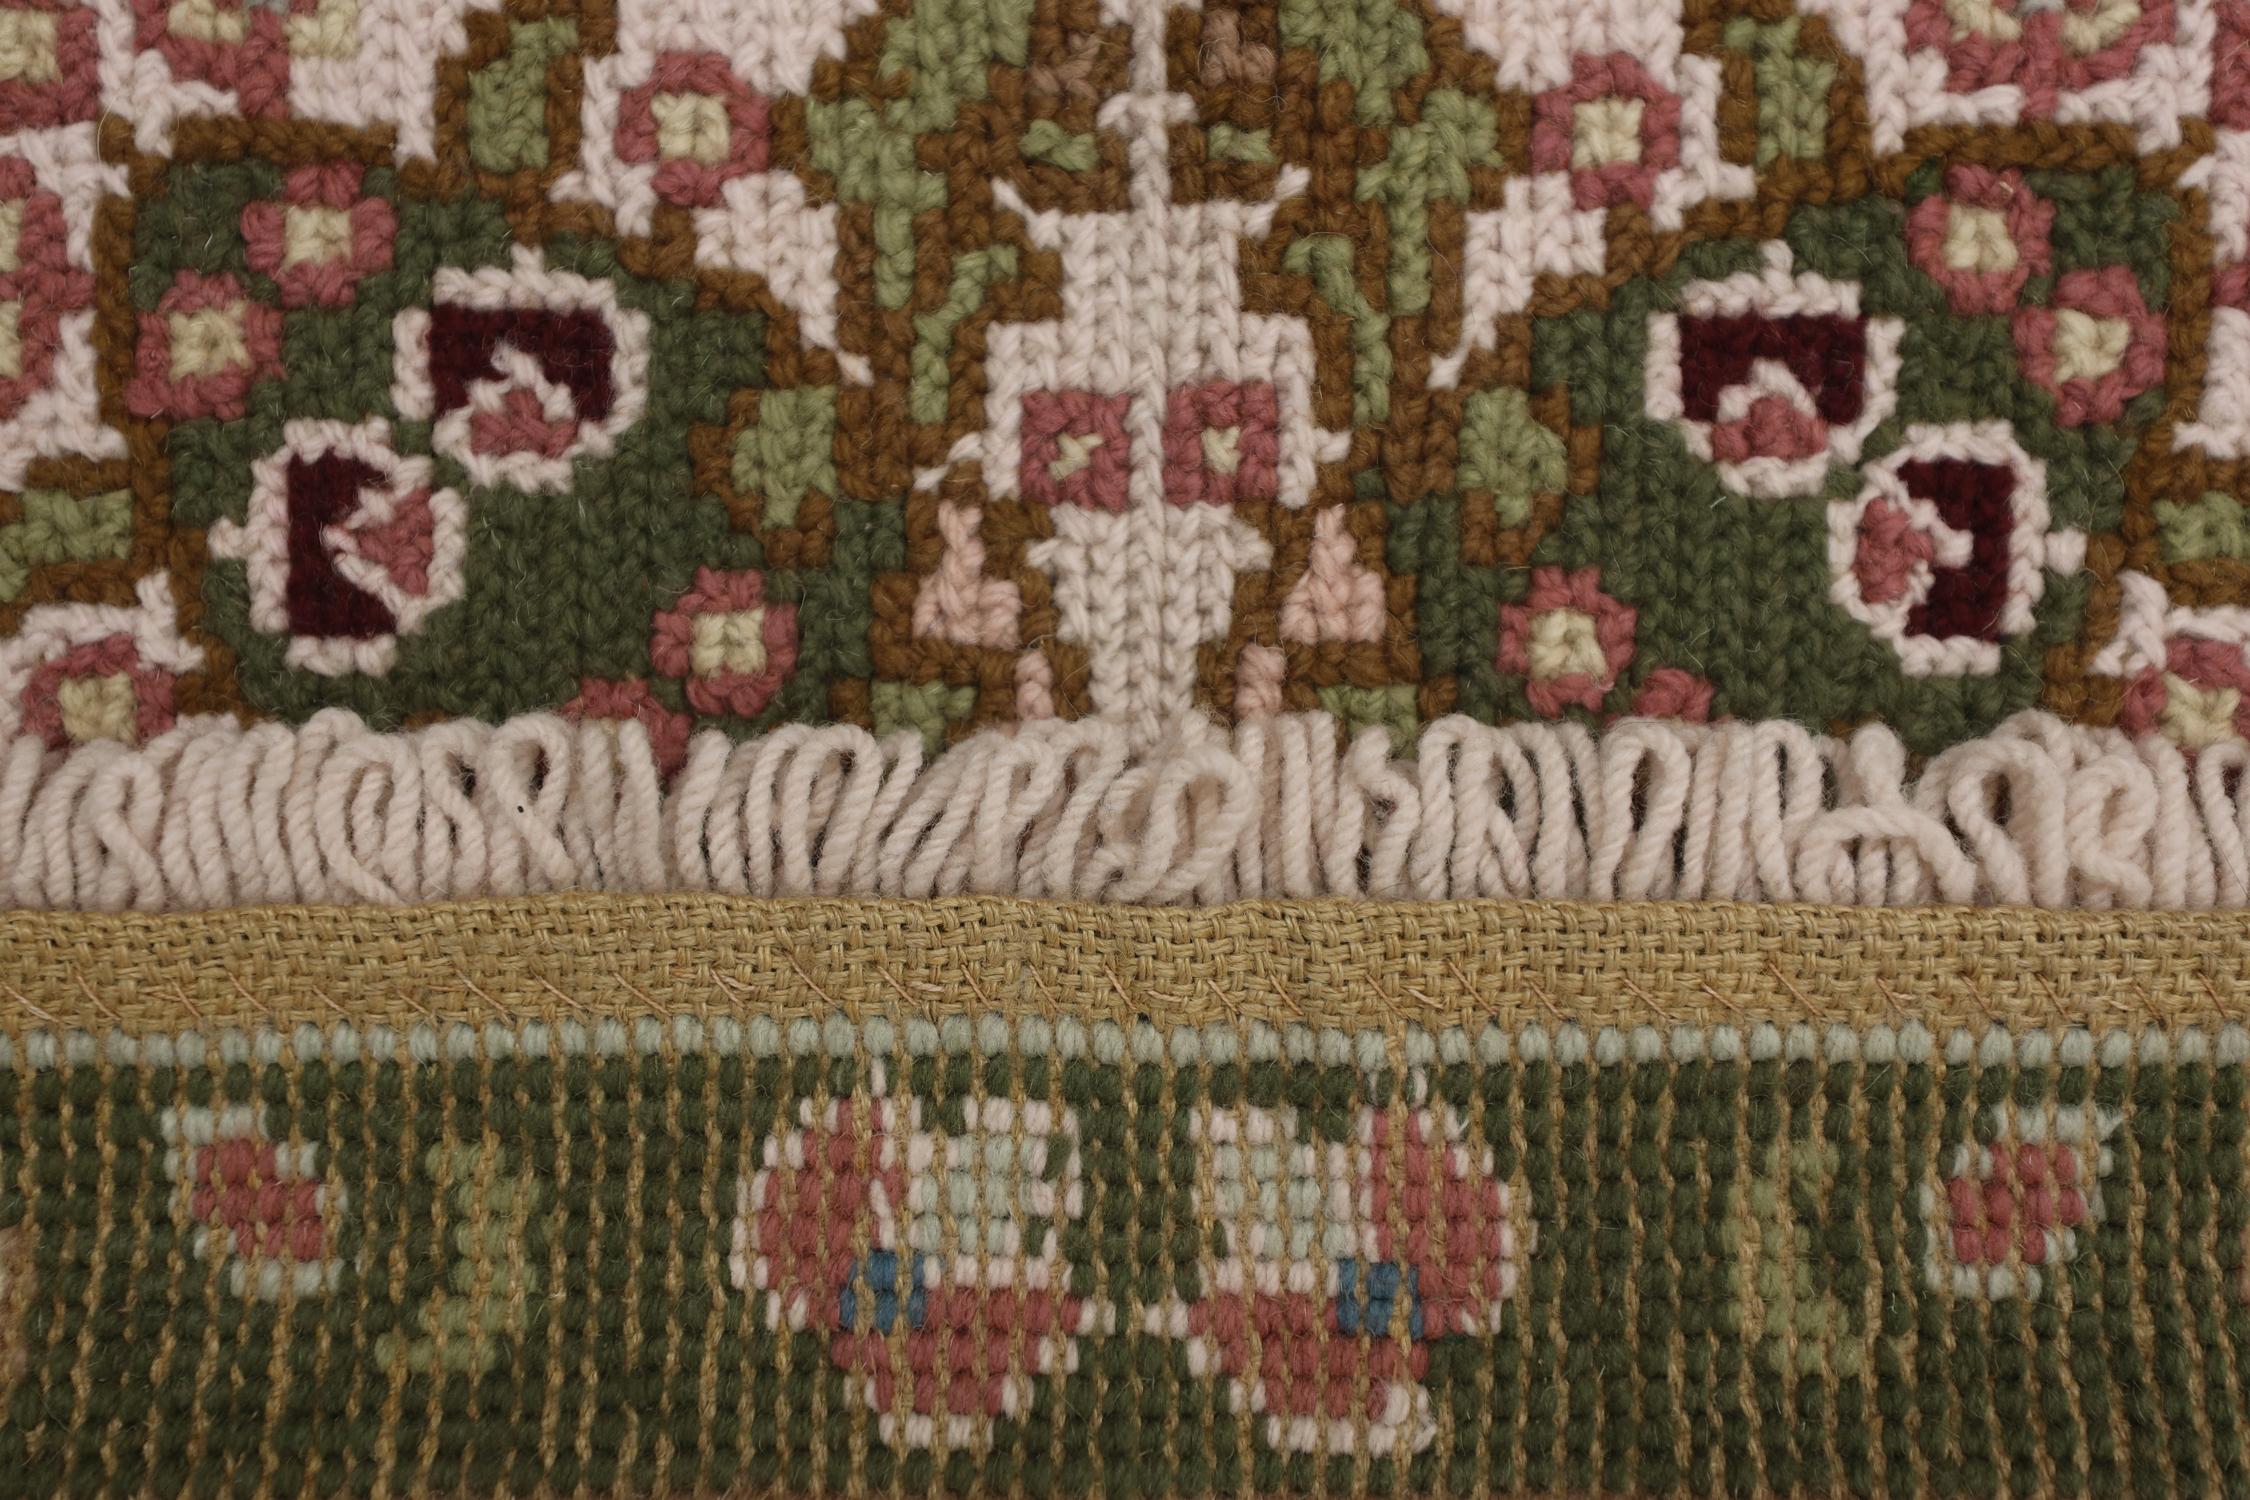 Hand-Crafted Portuguese Needlepoint Rug Traditional Wool Floral Rugs Handwoven Carpet For Sale